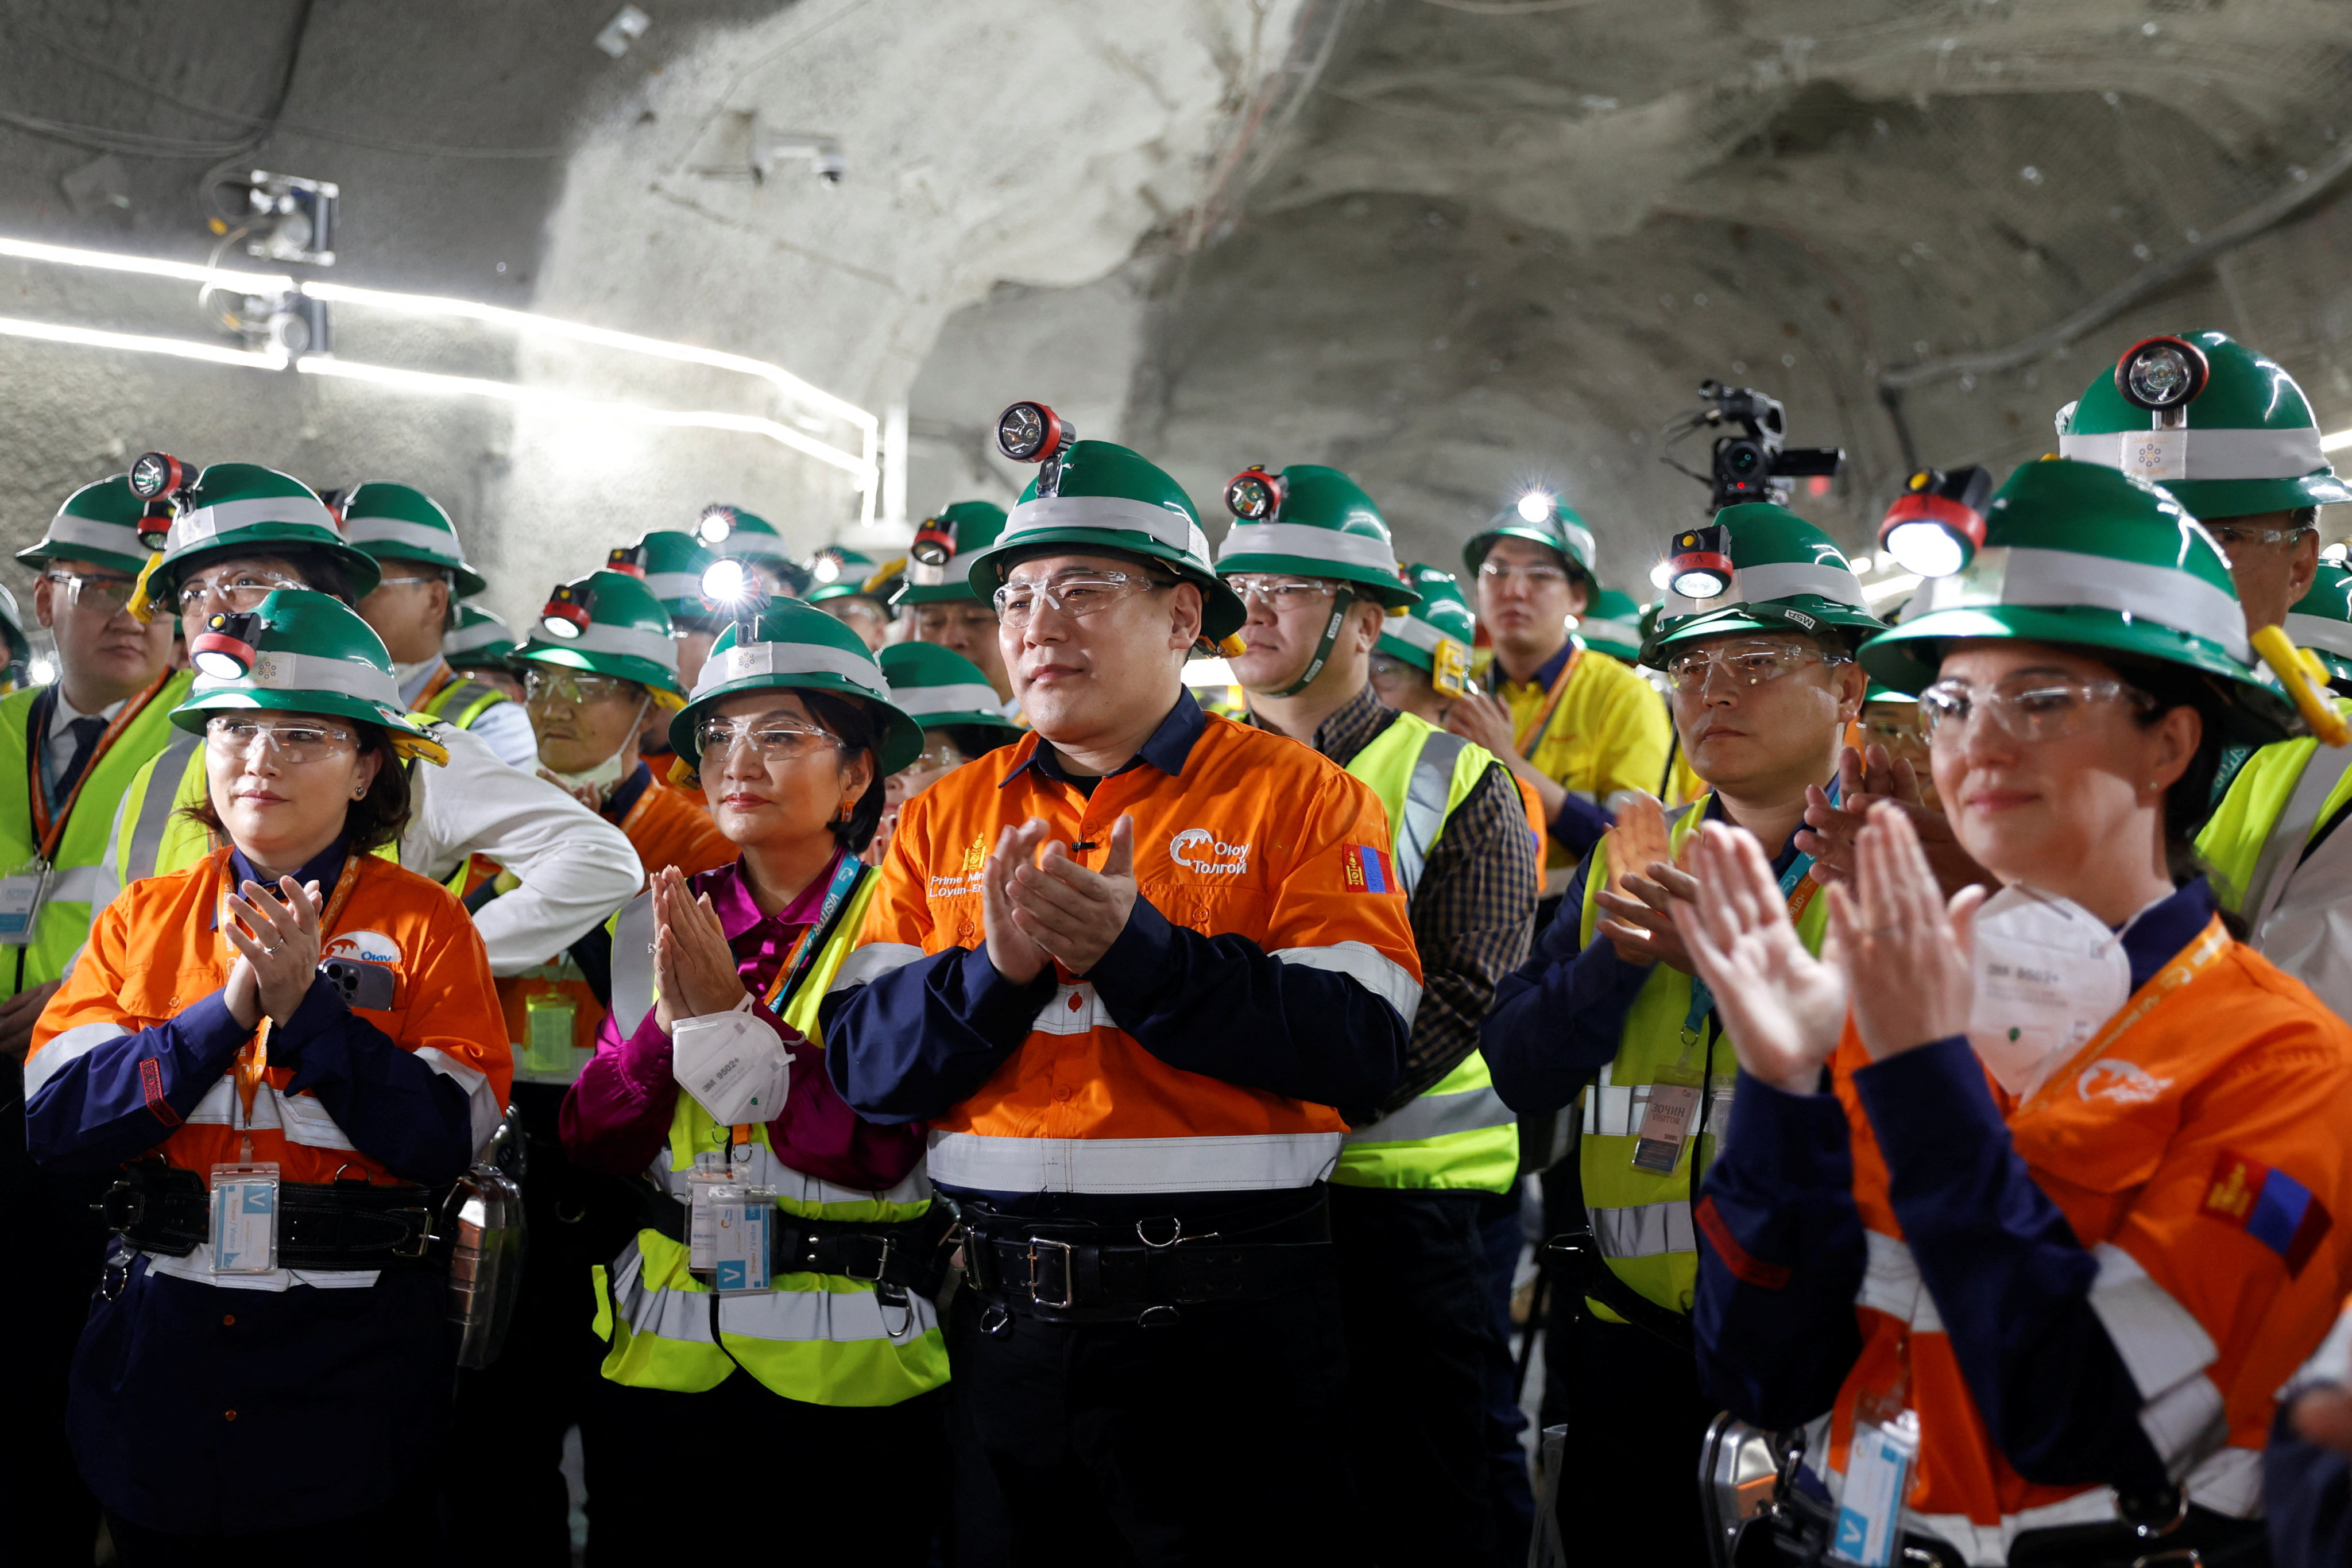 Mongolian Prime Minister Luvsannamsrain Oyun-Erdene attends the opening ceremony for an underground copper mine alongside Rio Tinto CEO Jacob Stausholm in Khanbogd, South Gobi, on March 13. Photo: Reuters